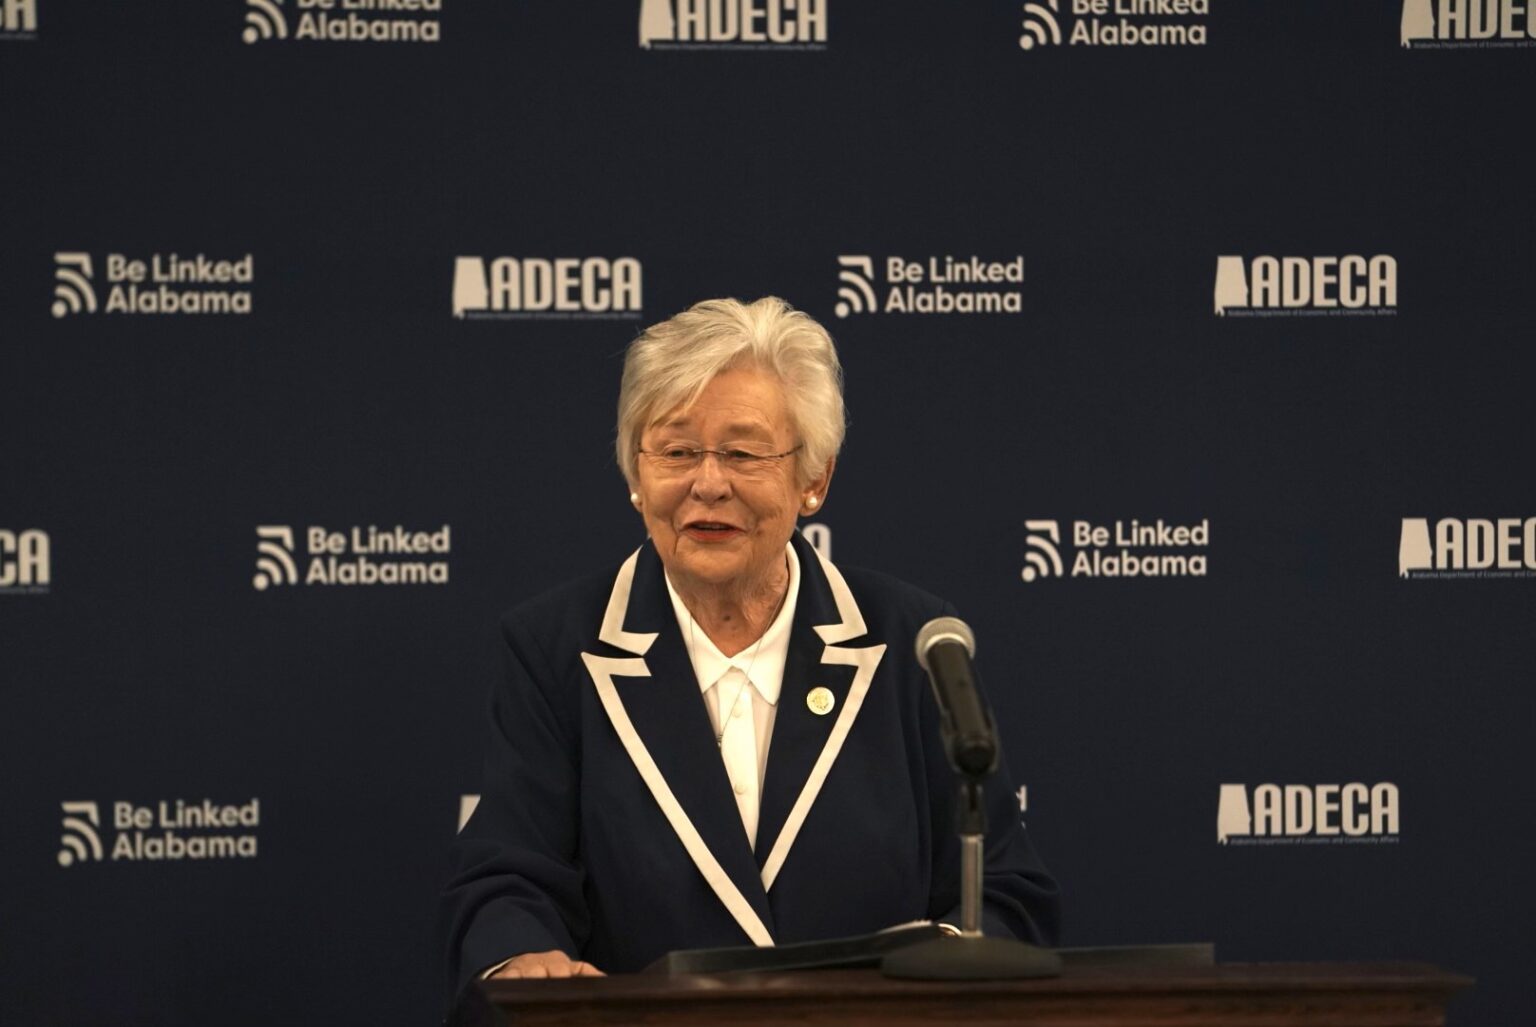 Governor Ivey Announces New Statewide Brand For High Speed Internet Expansion Details Upcoming 